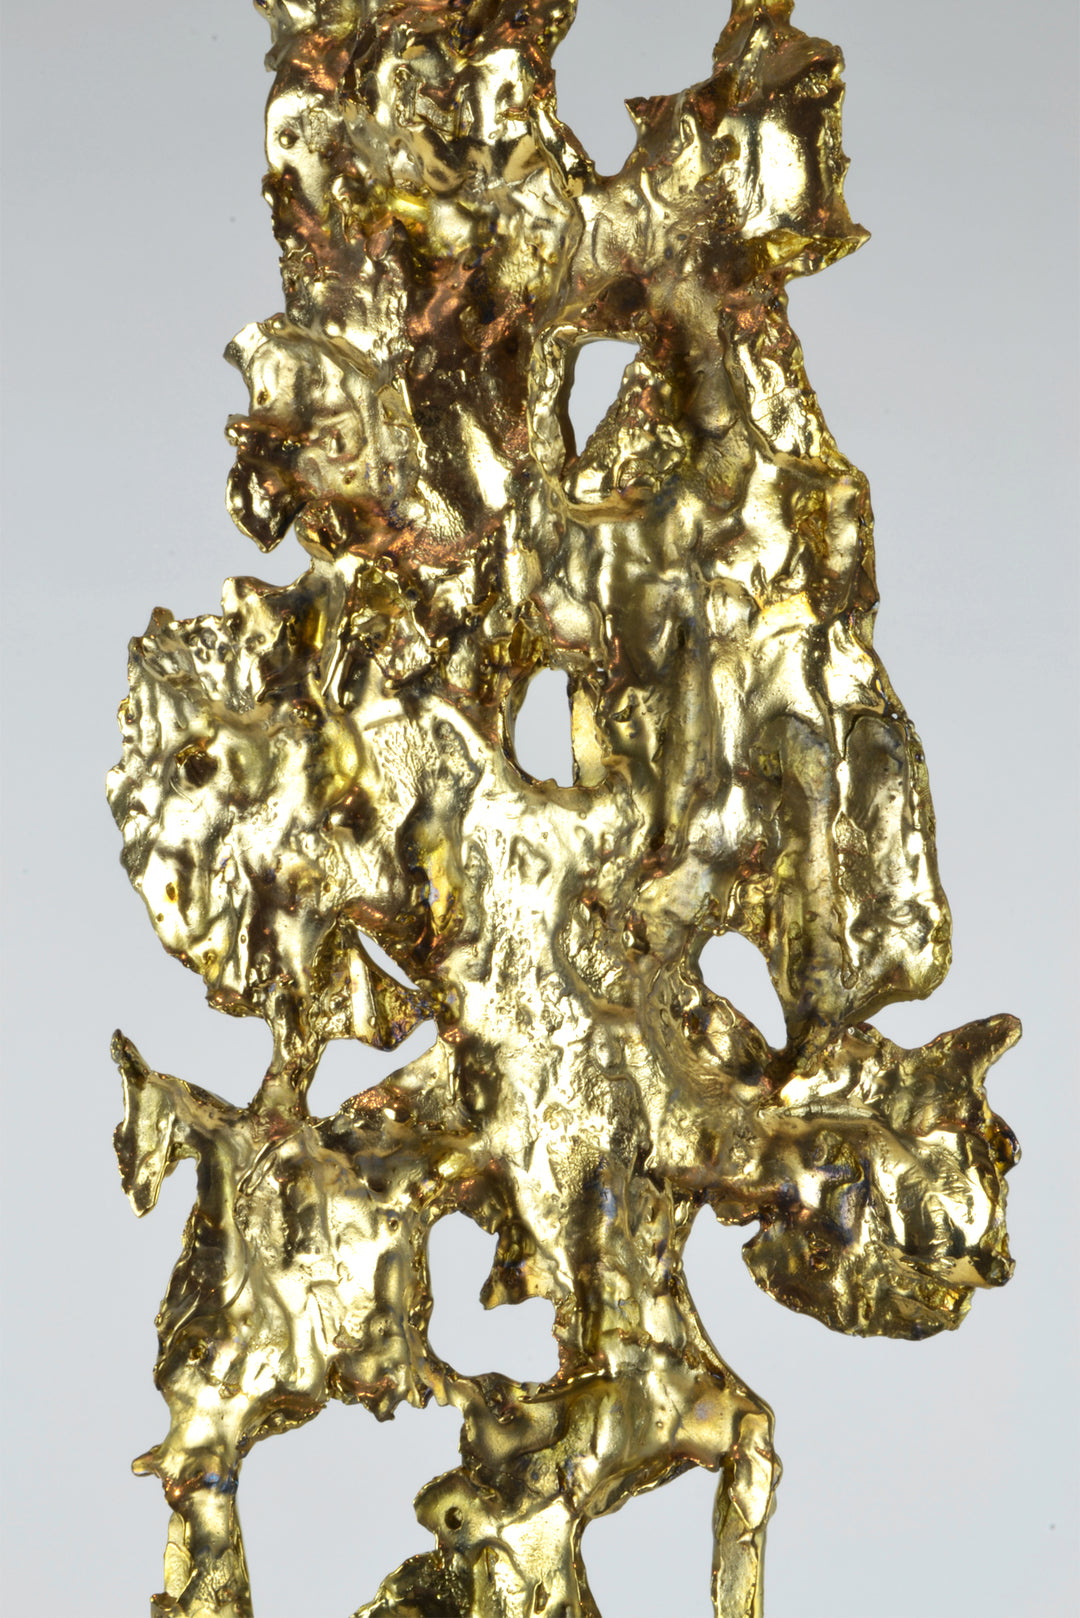 Molten Brass Leaf - Detail 3 - Brass Sculpture. Abstract style large decorative object. Gold colour. Calacatta marble base. Materials: Brass, Marble Centrepiece home decor. A luxurious sculpture to be the focal point in any interior. Top interior design t